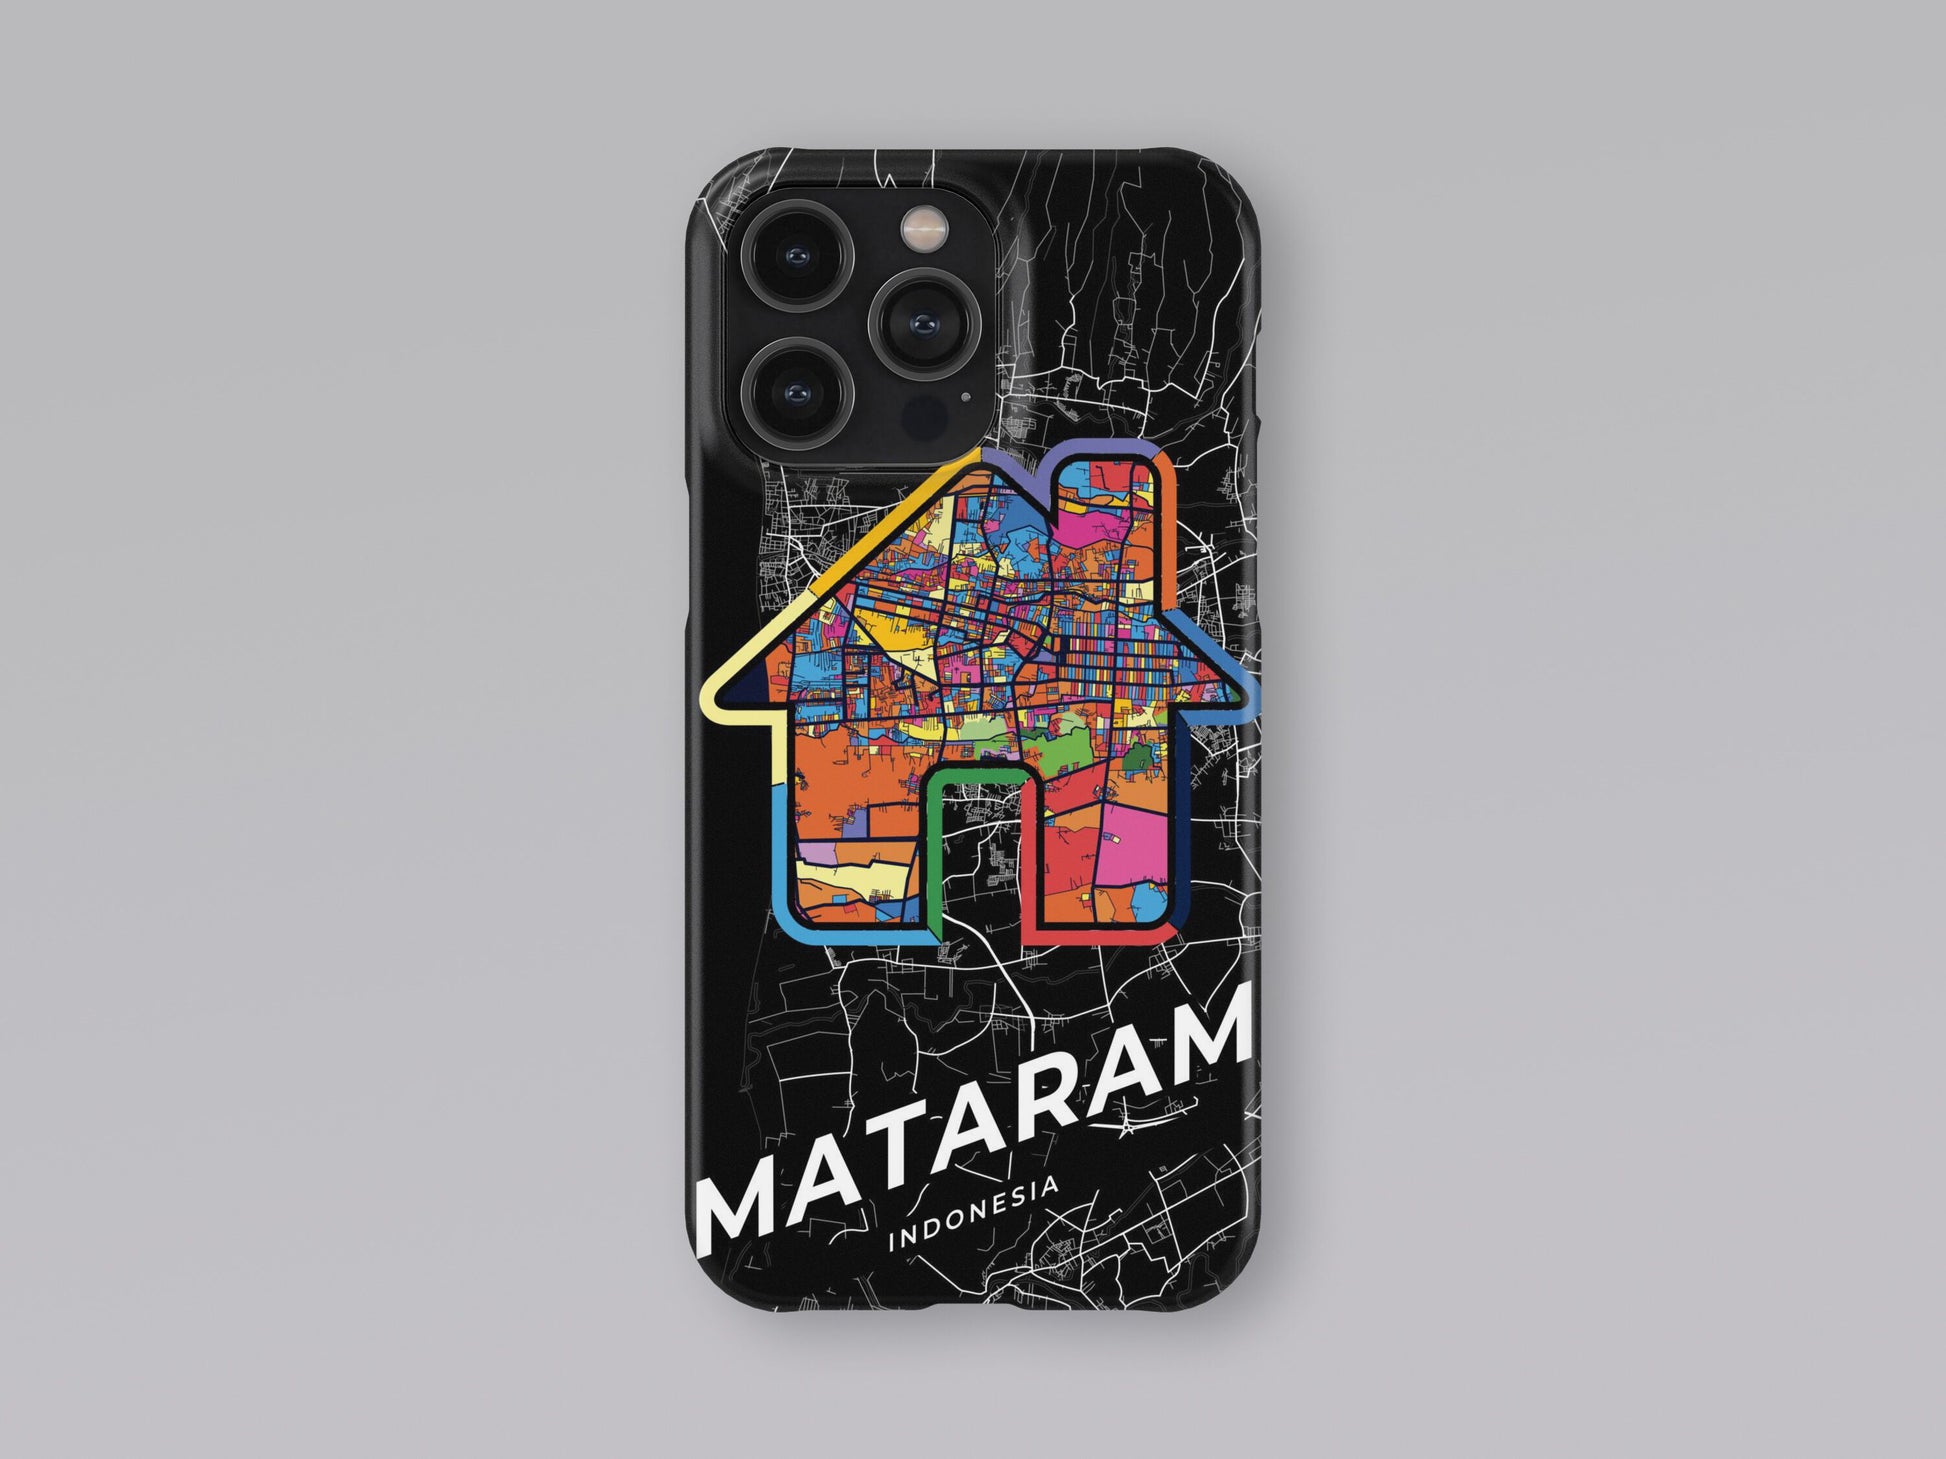 Mataram Indonesia slim phone case with colorful icon. Birthday, wedding or housewarming gift. Couple match cases. 3